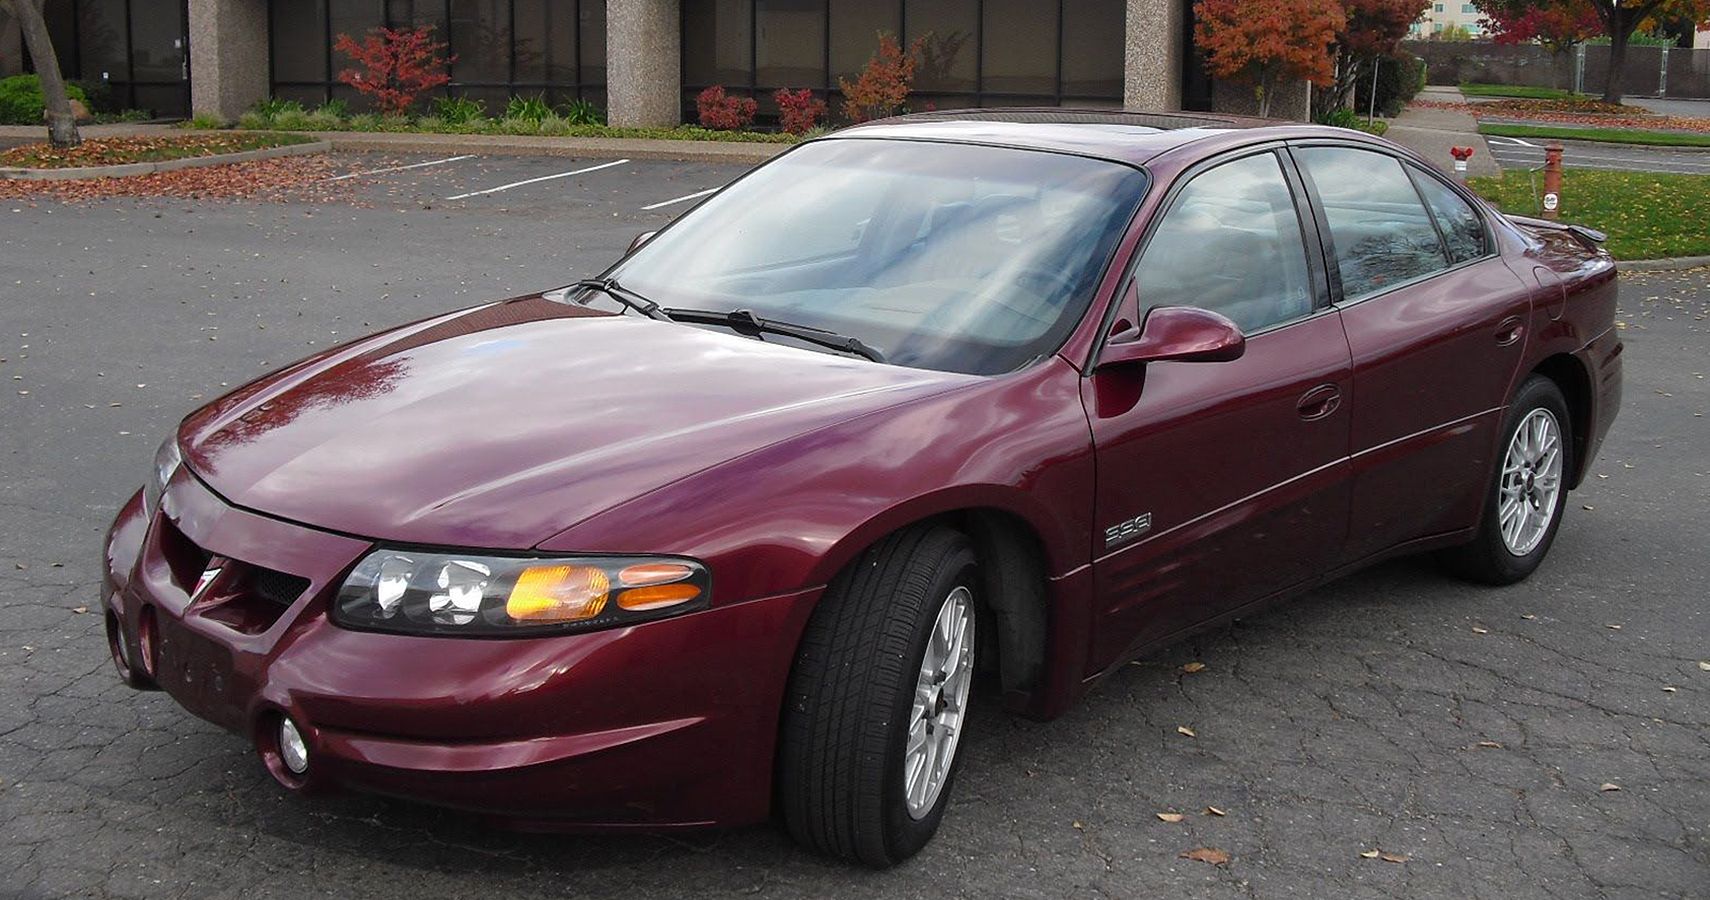 2000-2005 Pontiac Bonneville: Lagged Behind The Competition